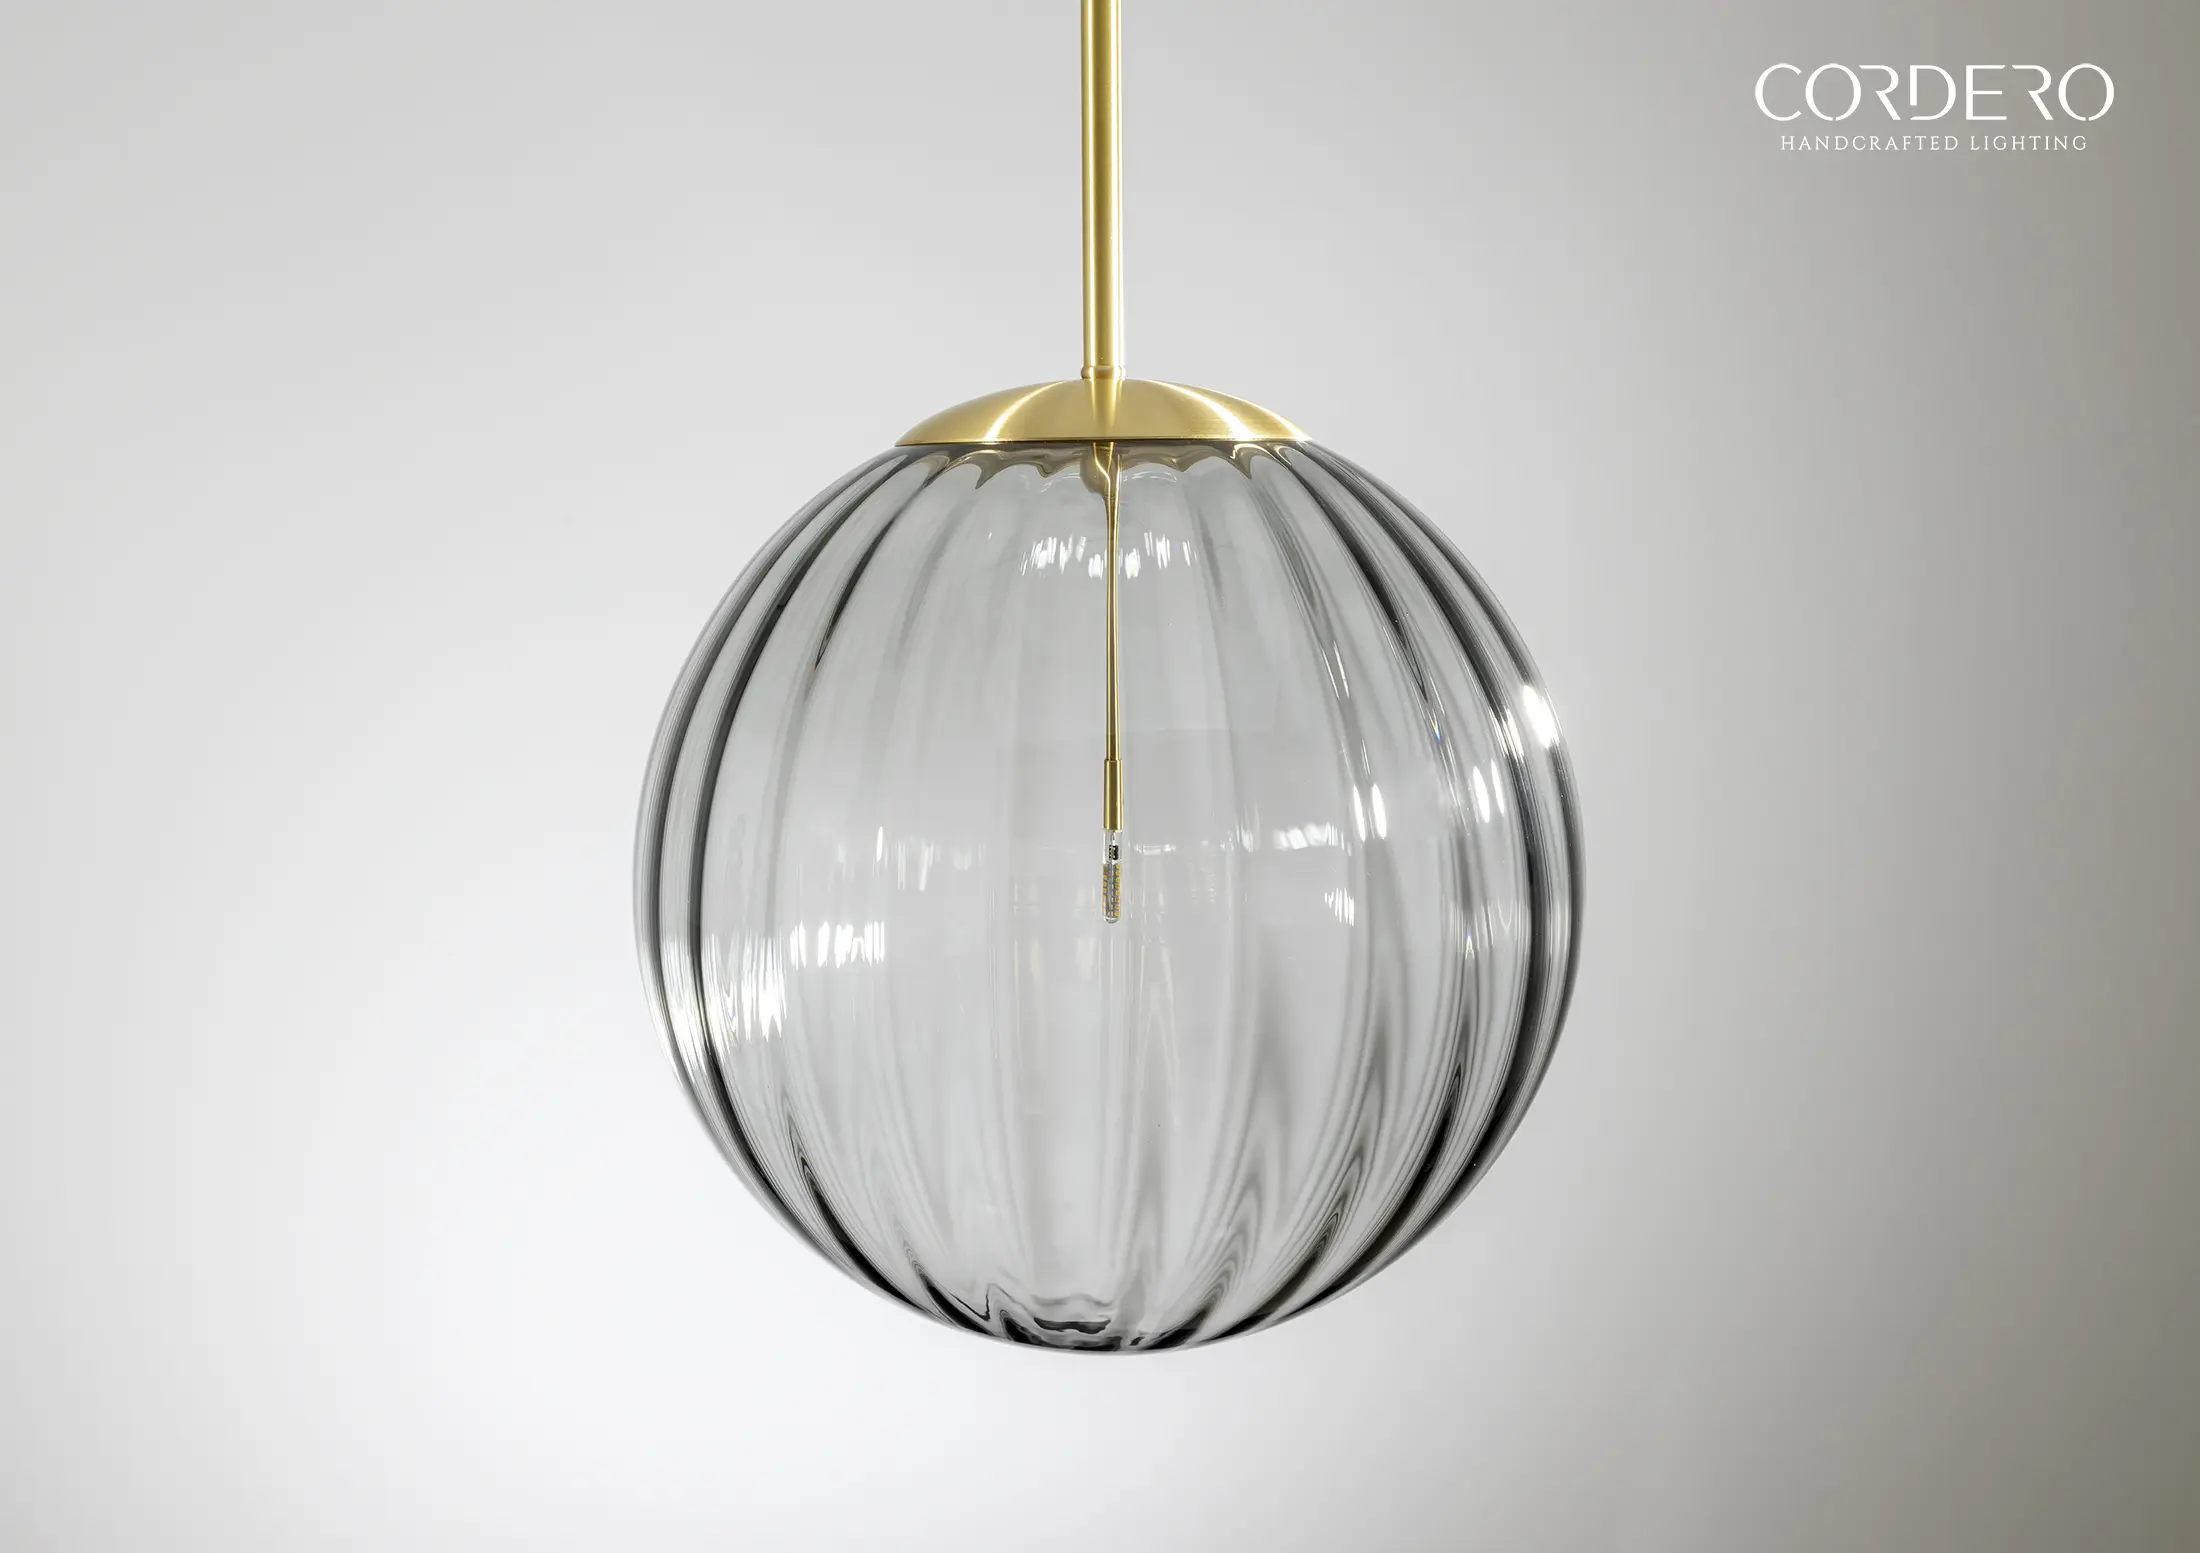 next smoked glass light - How to choose ceiling lights